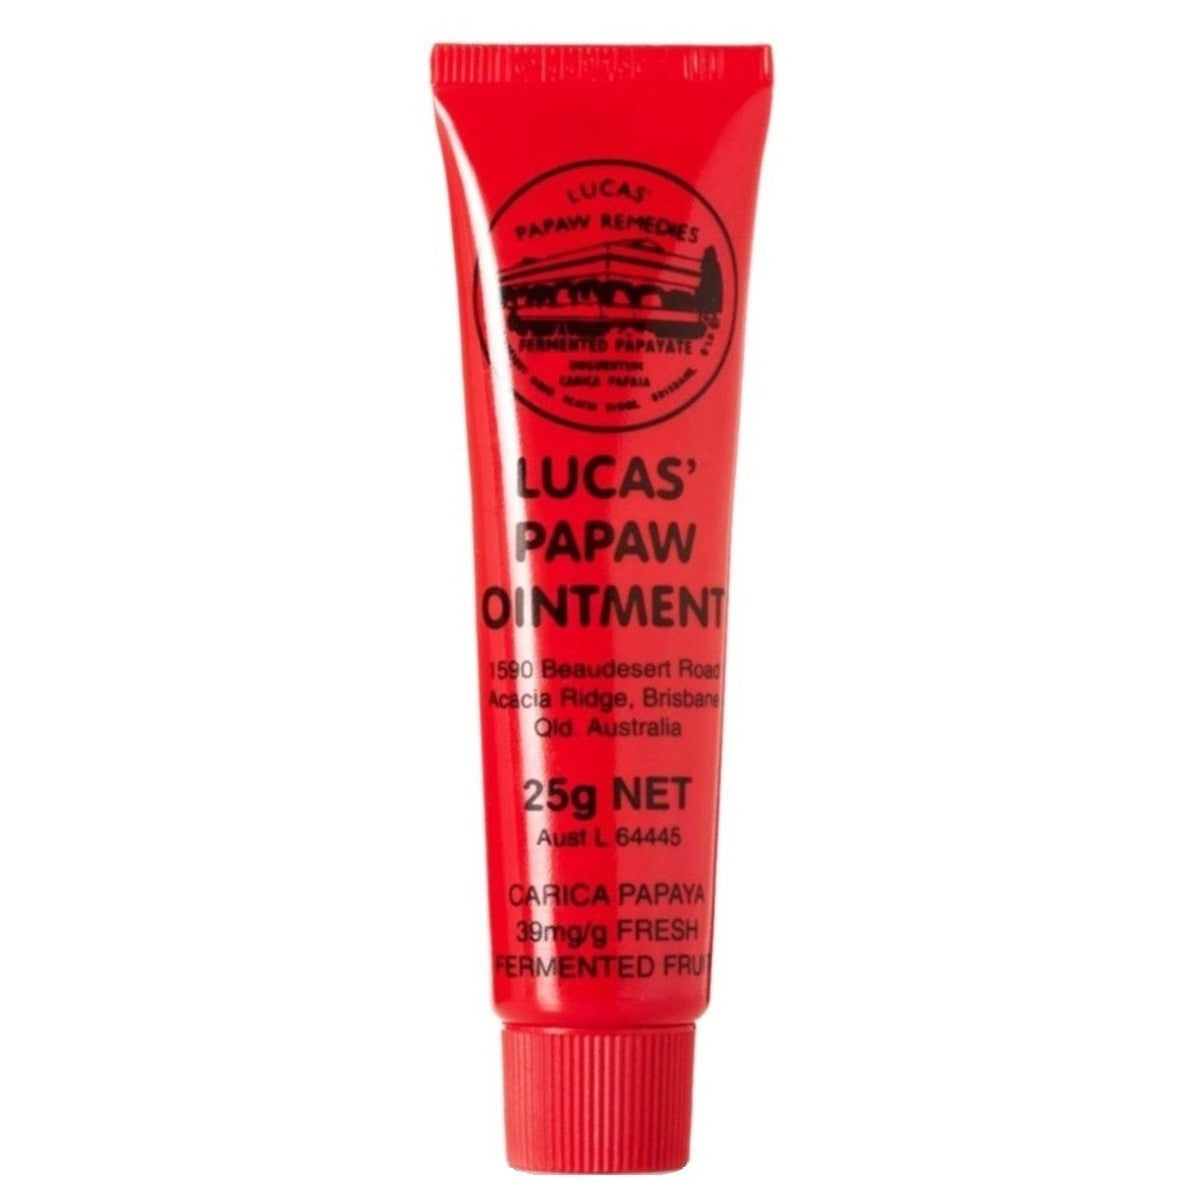 Lucas Paw Paw Ointment 25g